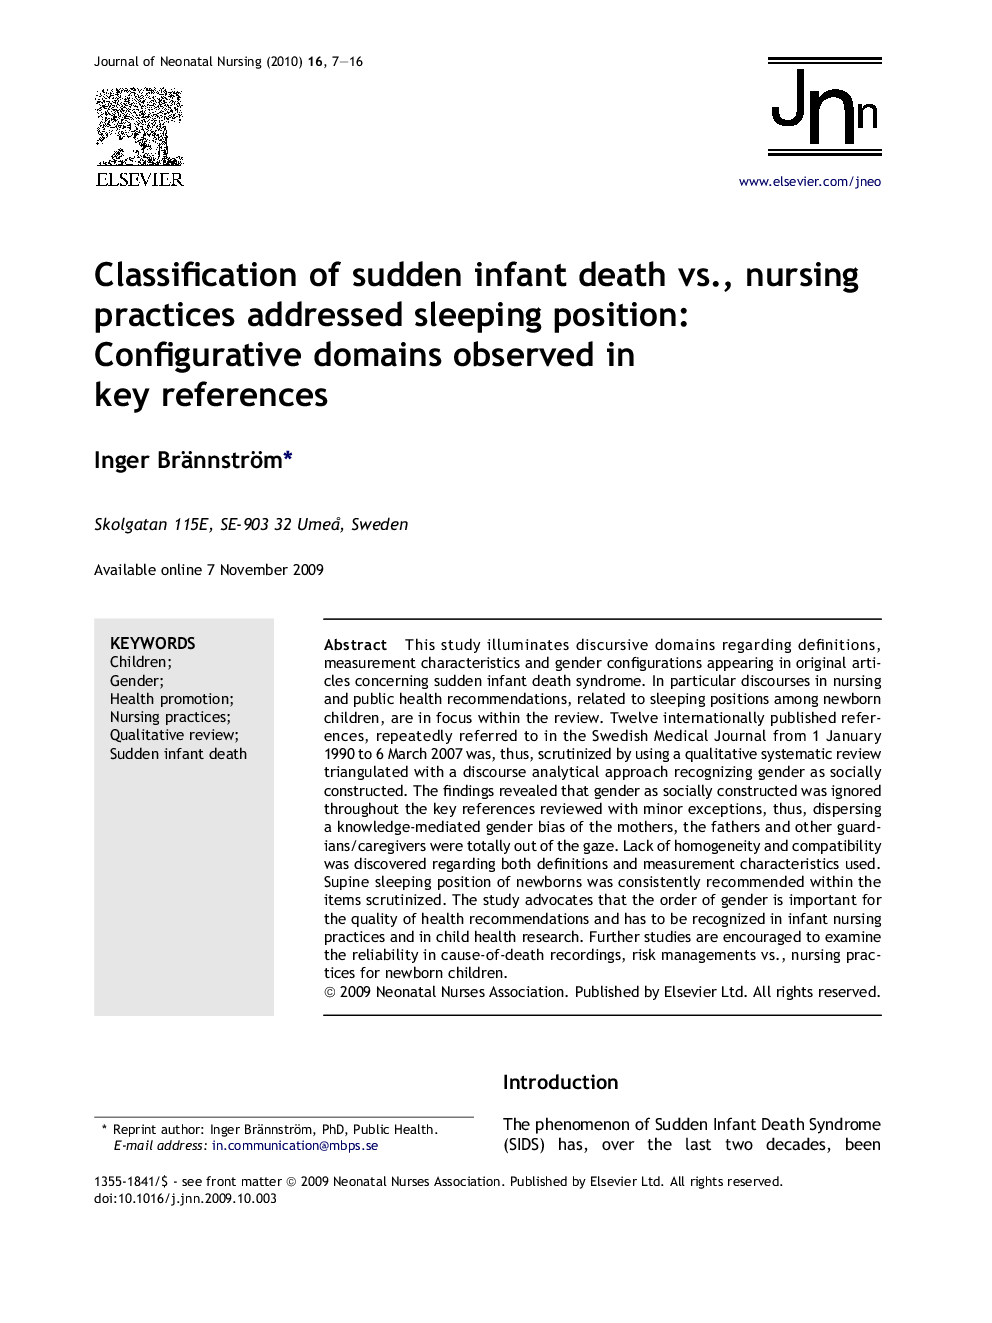 Classification of sudden infant death vs., nursing practices addressed sleeping position: Configurative domains observed in key references